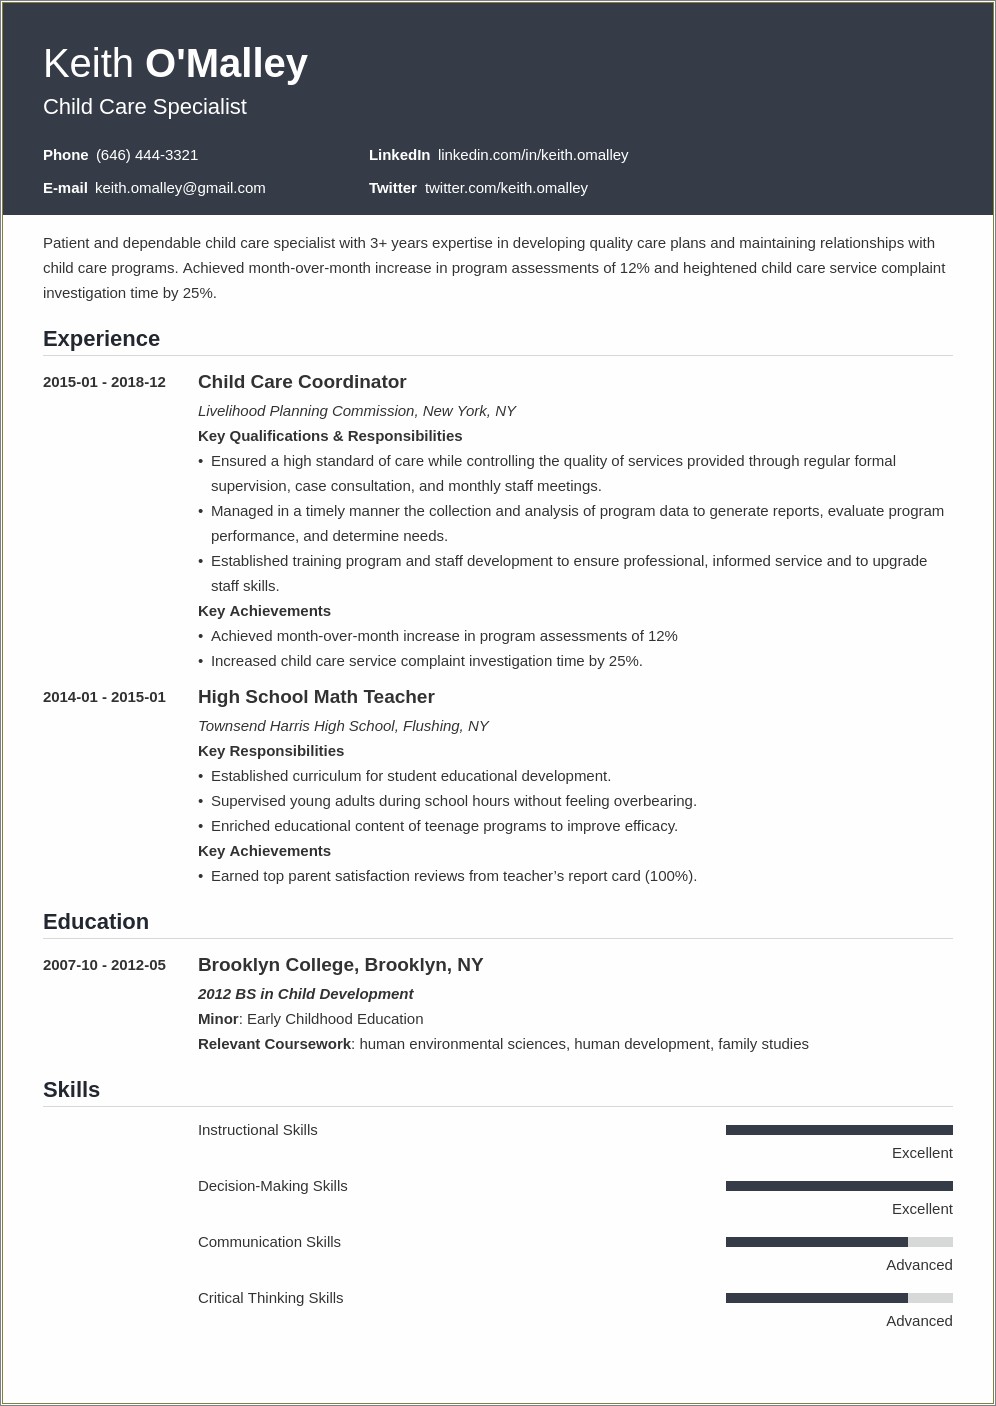 Resume Summary Examples For Working With Kids